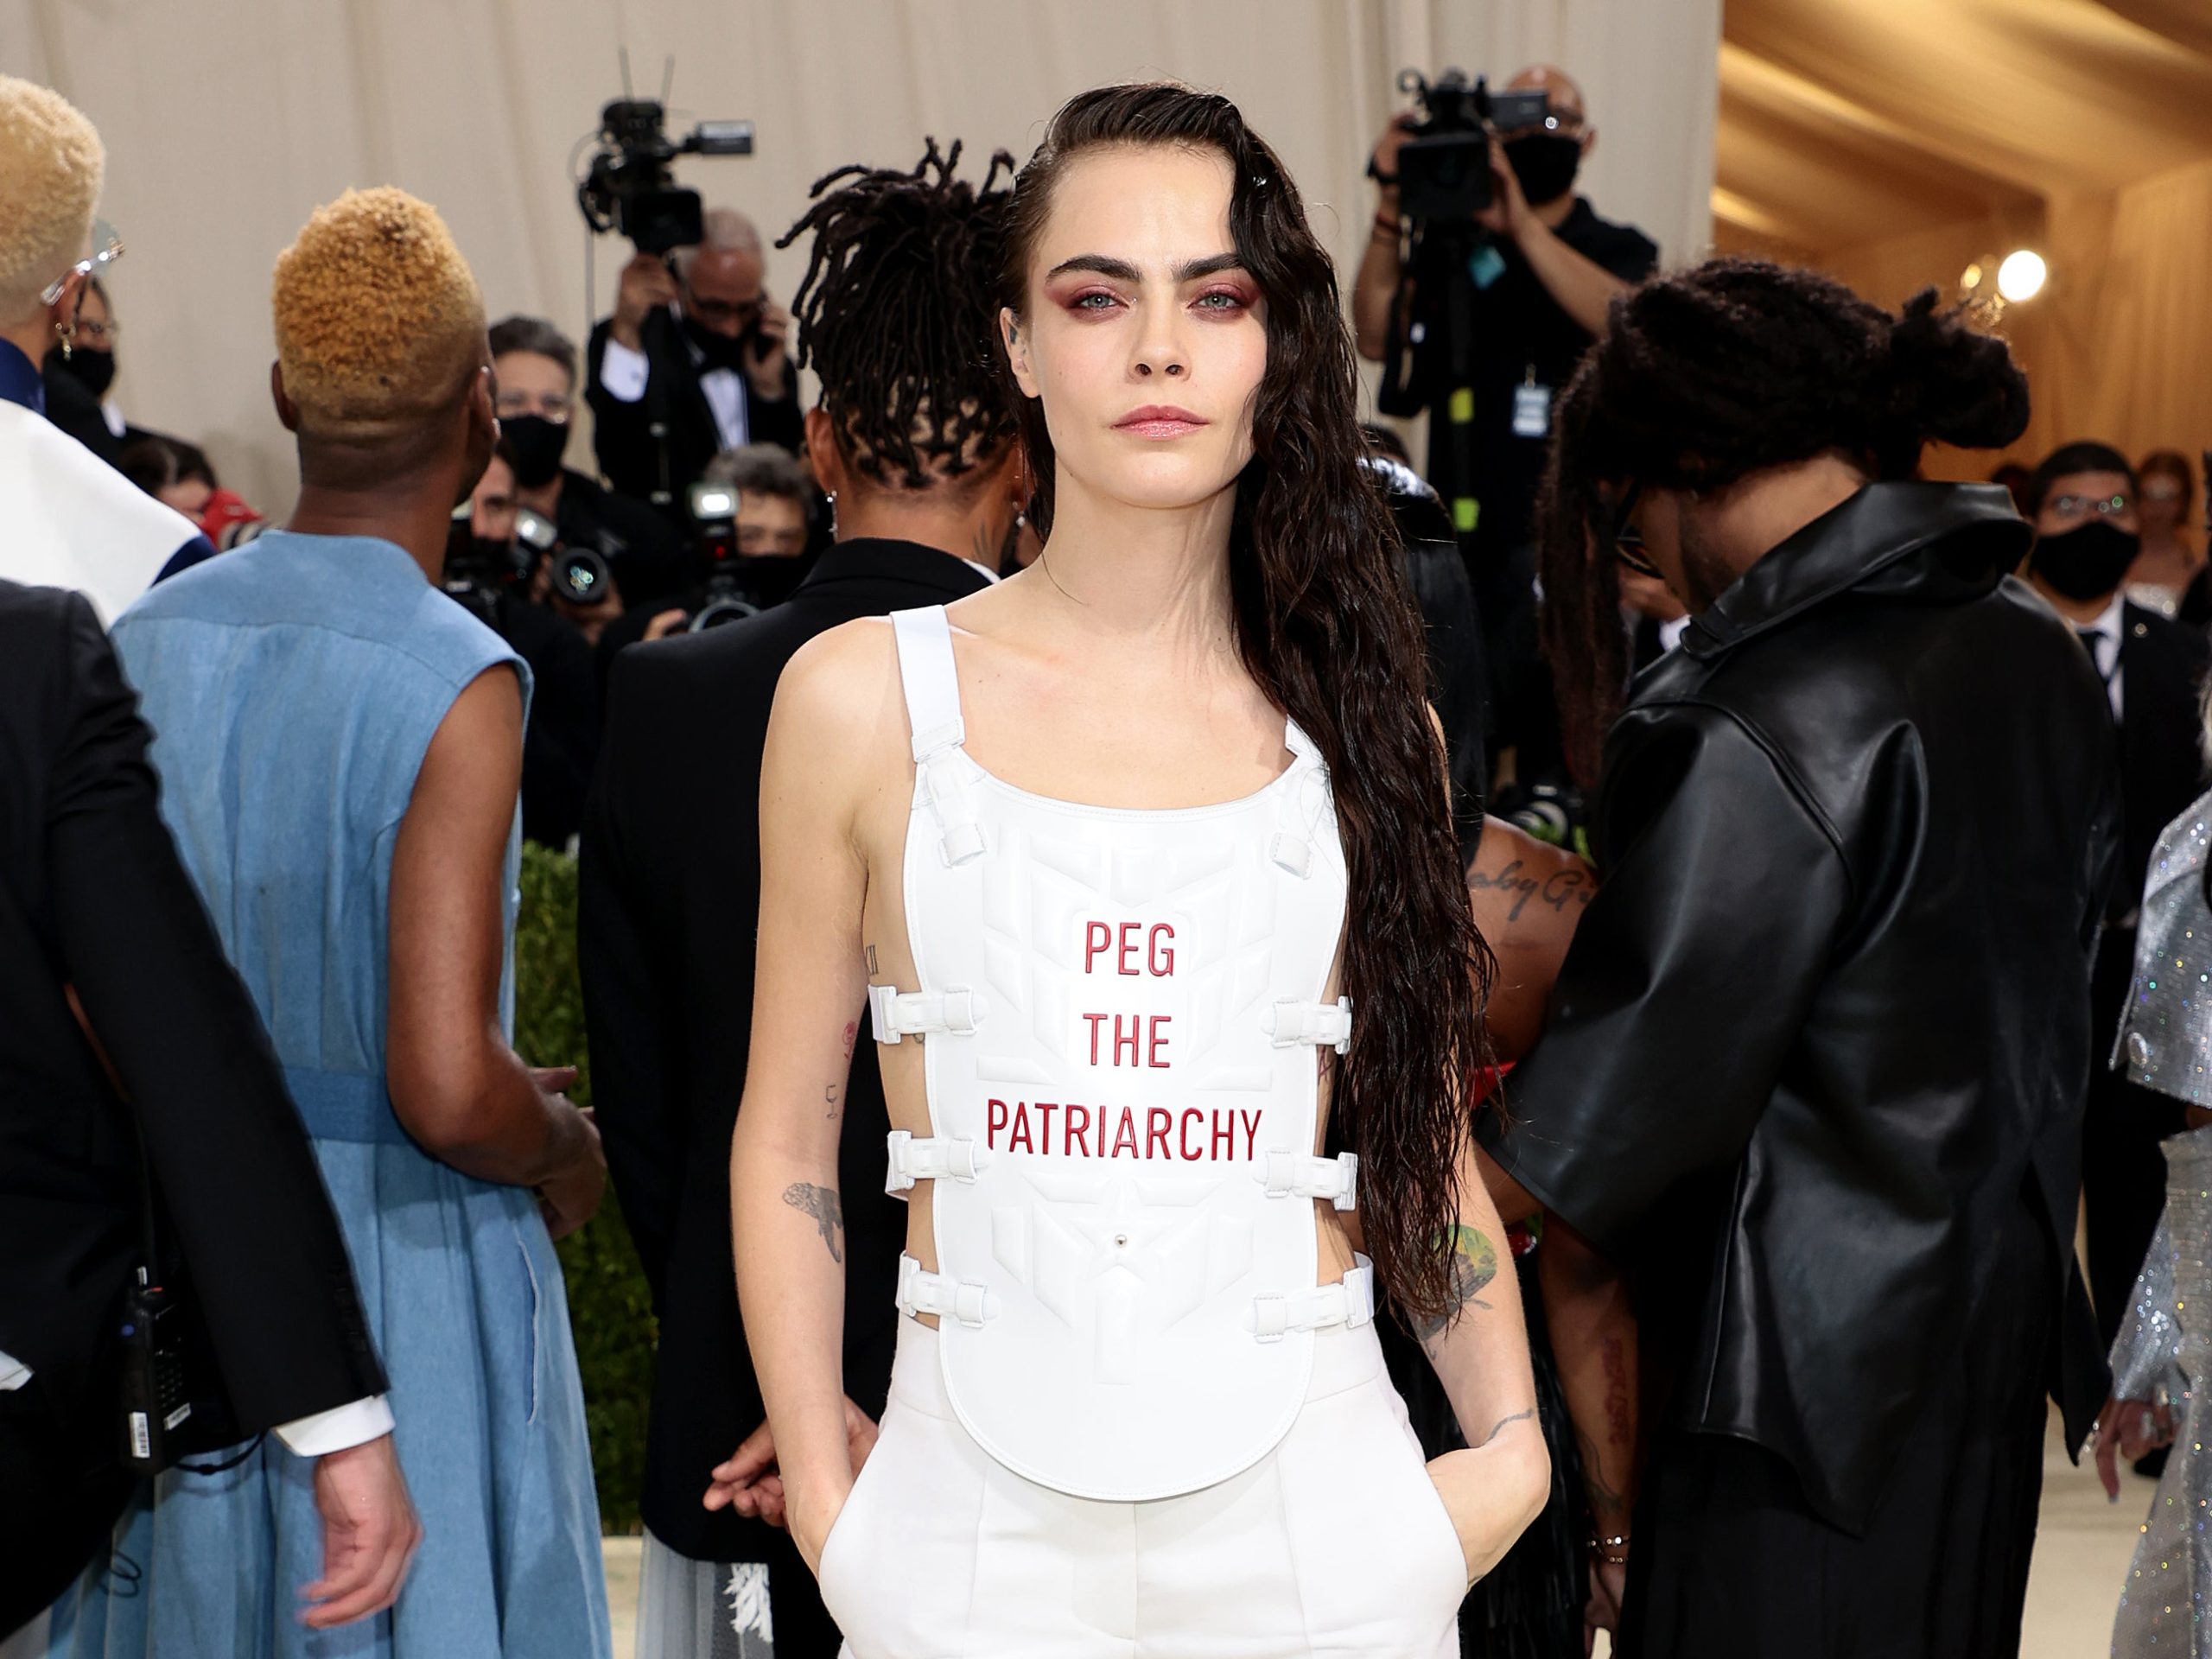 Queer woman of color behind ‘Peg The Patriarchy’ says Cara Delevingne didn’t credit her for using the slogan on Met Gala outfit